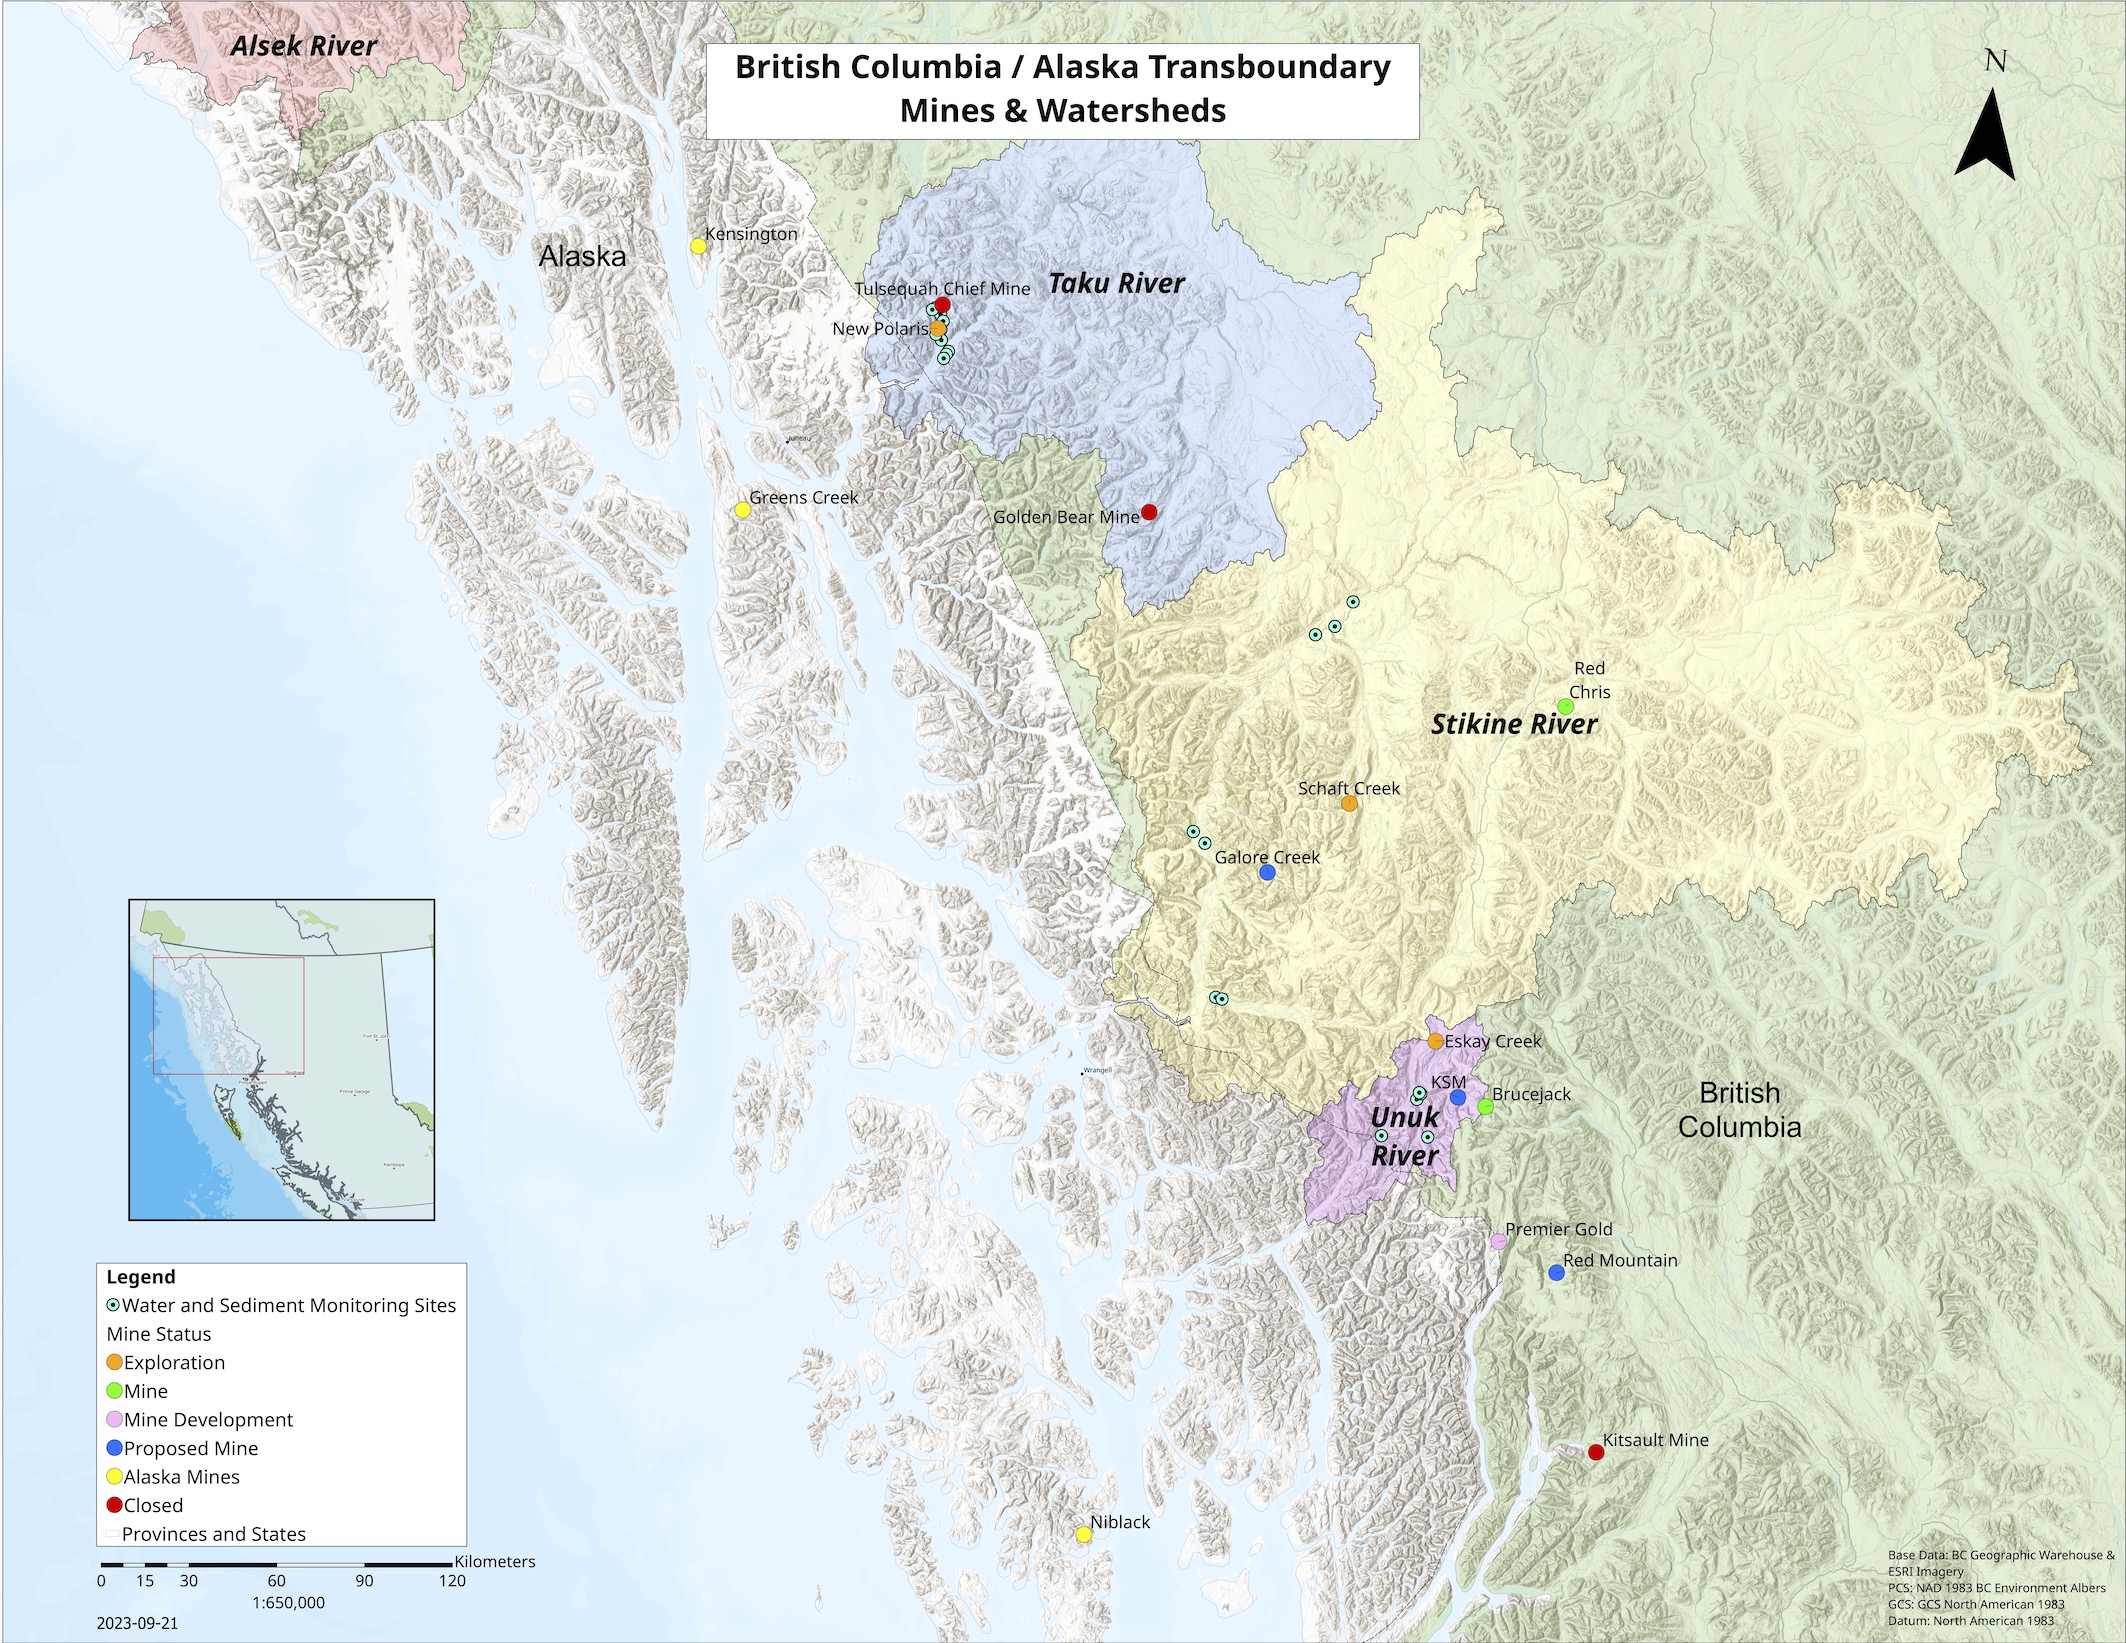 Image of Transboundary Watersheds and Mines